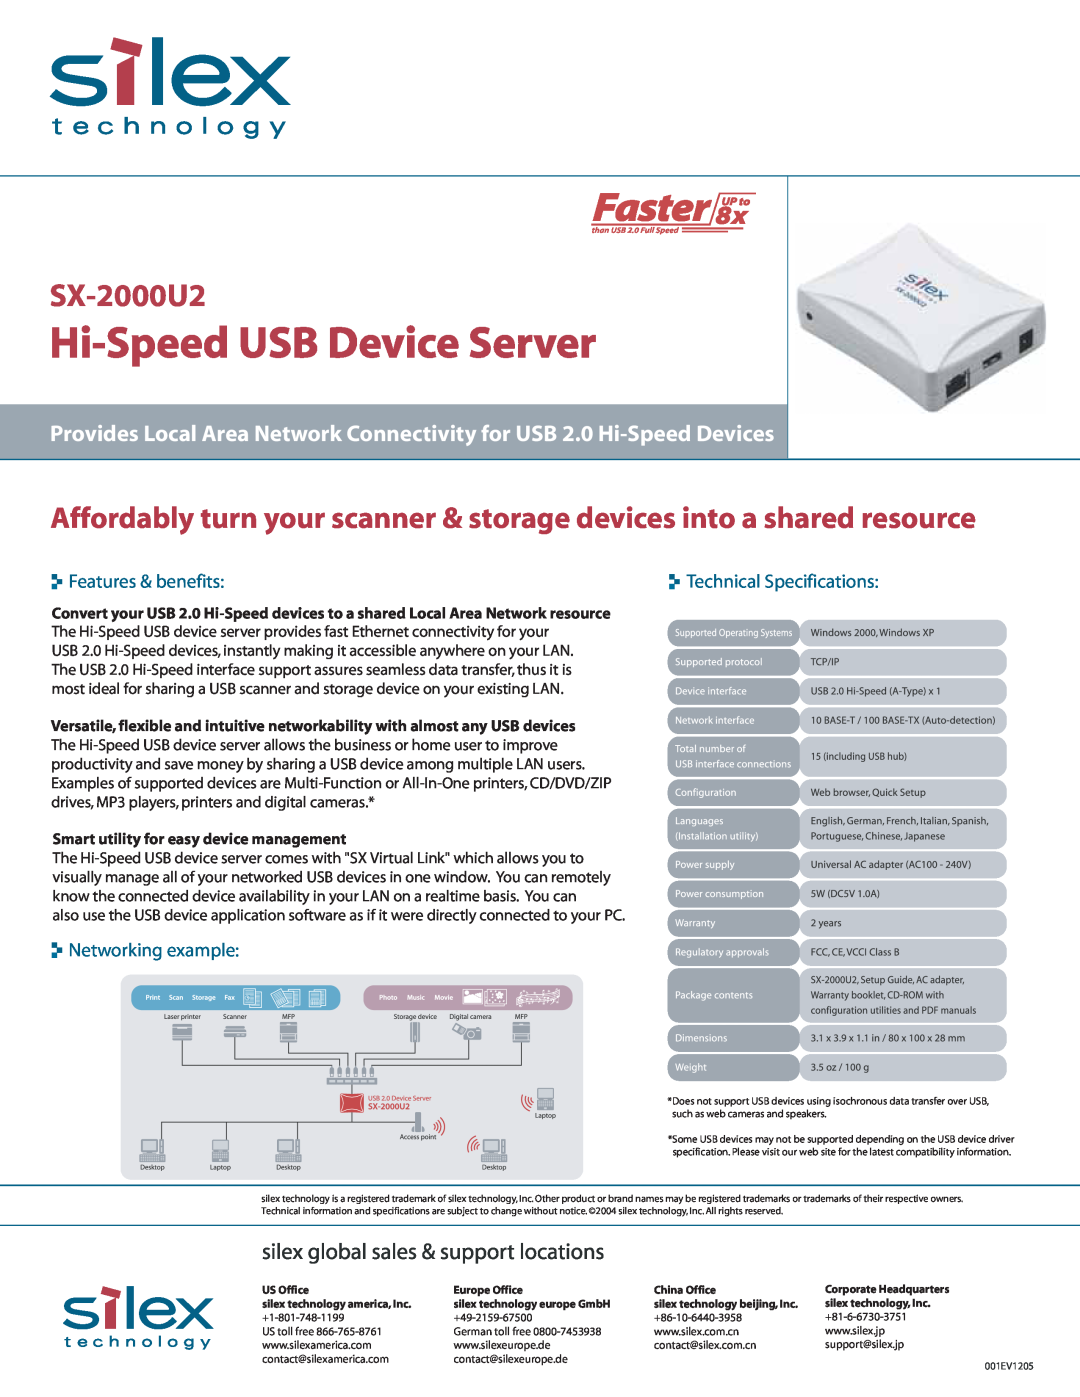 Silex technology SX-2000U2 technical specifications Hi-Speed USB Device Server, Features & benefits, Networking example 